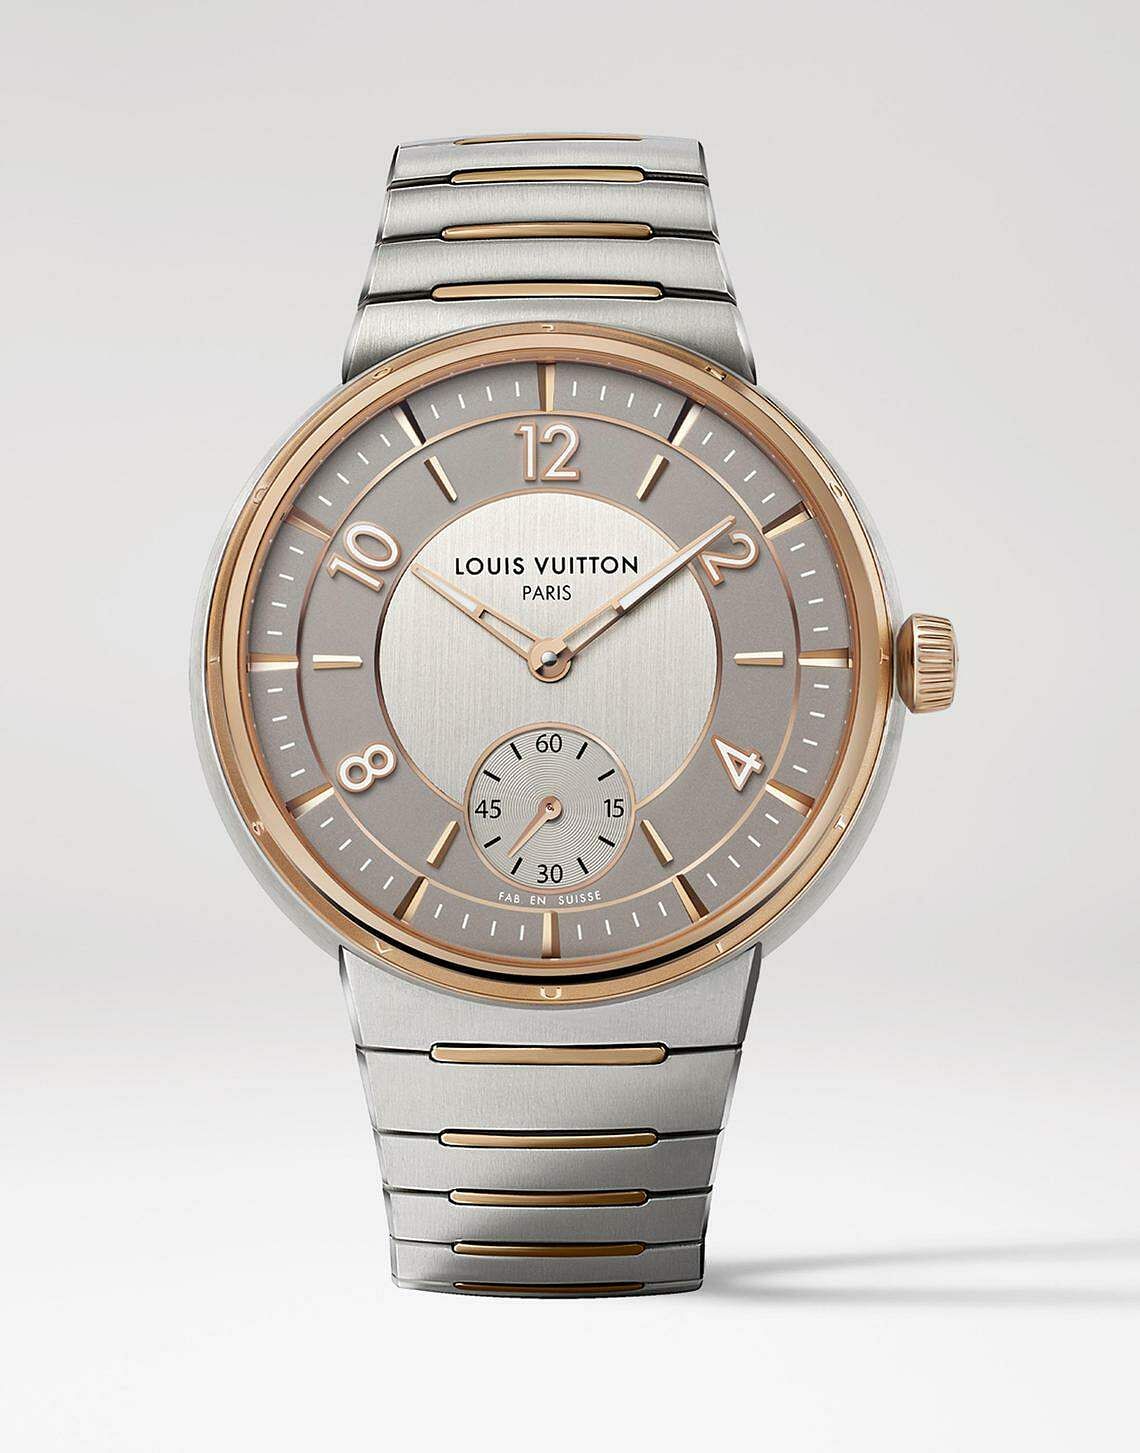 Jean Arnault is taking Louis Vuitton watchmaking to the next level